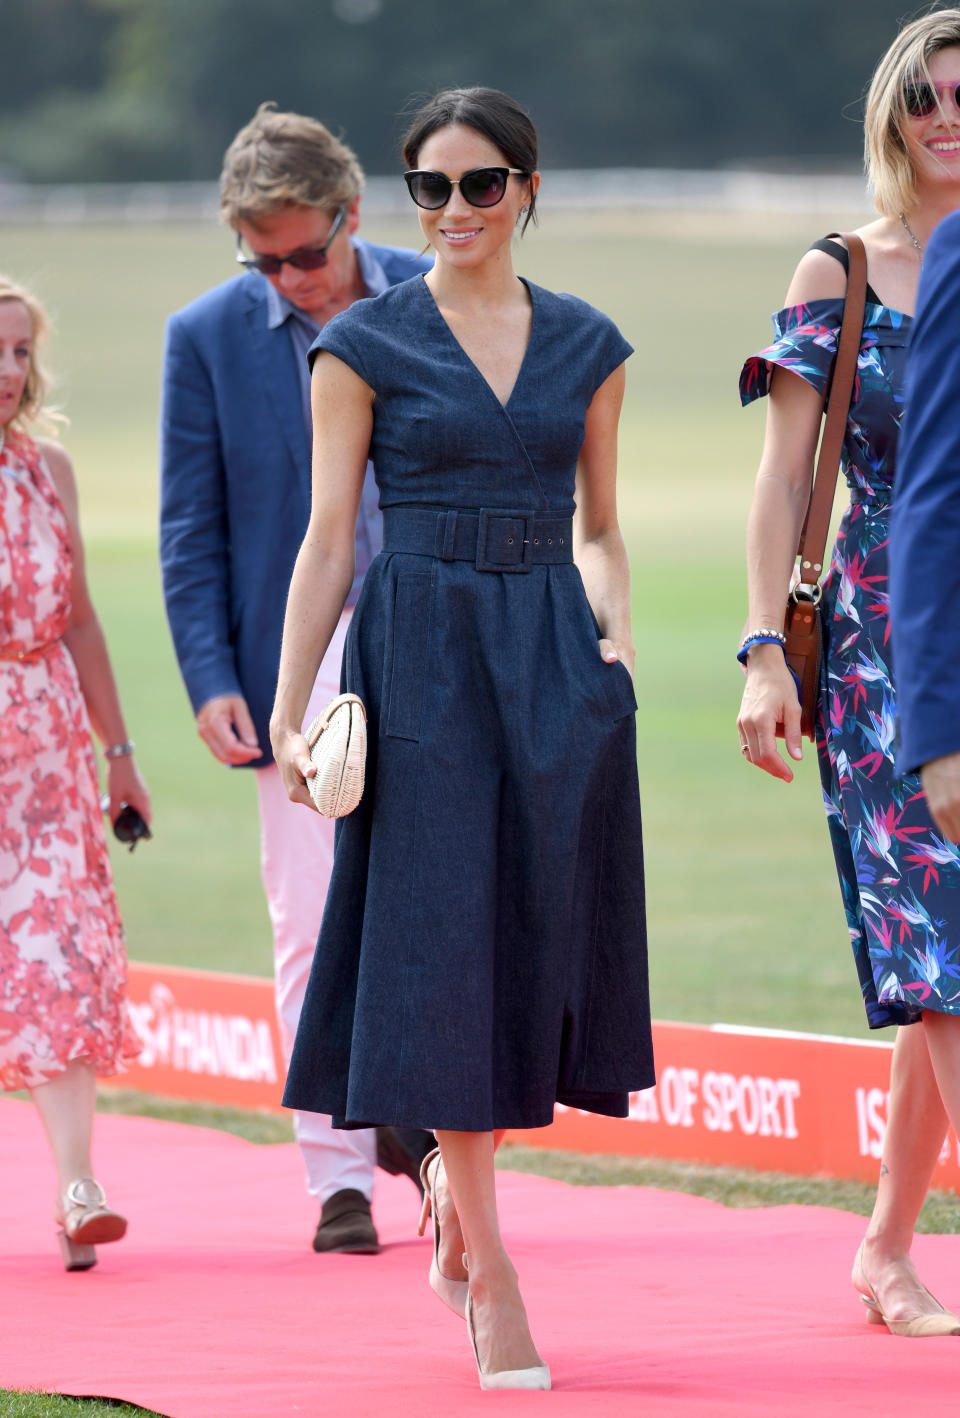 Meghan, Duchess of Sussex attends the Sentebale ISPS Handa Polo Cup at the Royal County of Berkshire Polo Club on July 26, 2018 in Windsor, England.  (Photo by Karwai Tang/WireImage)